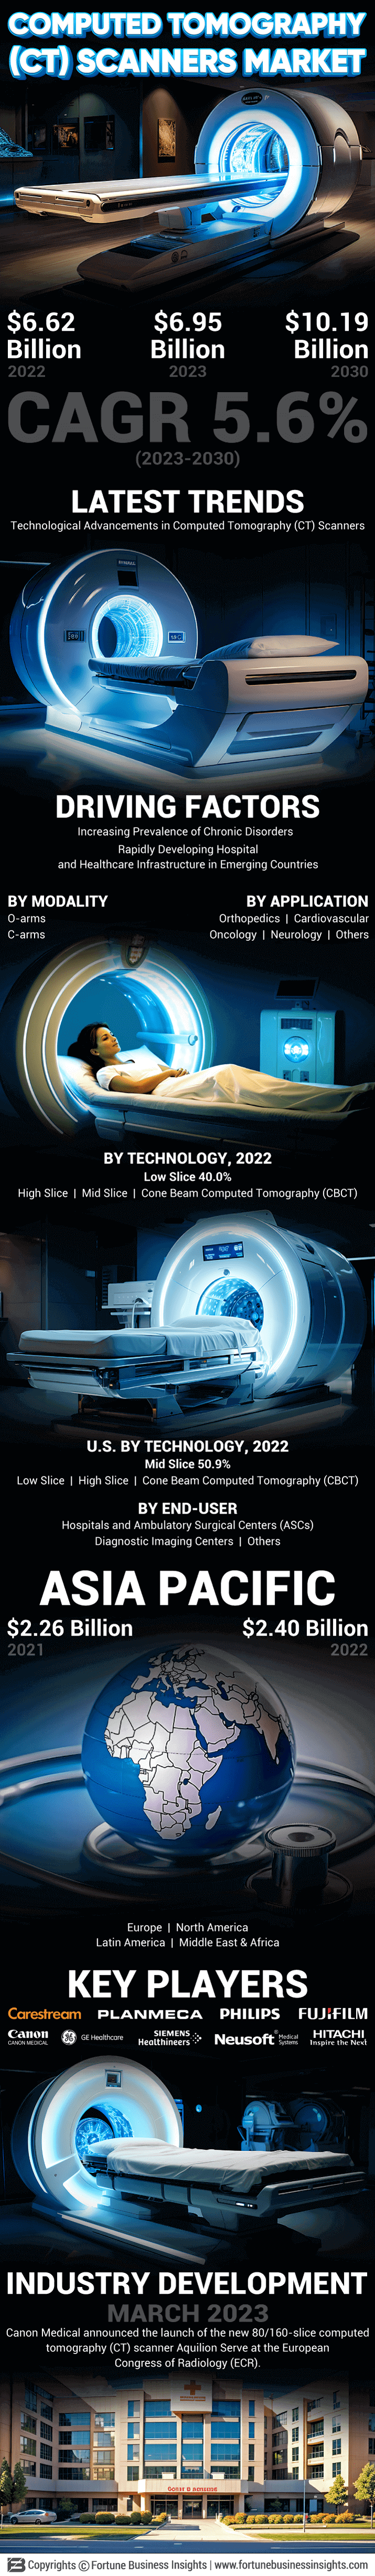 Computed Tomography (CT) Scanner Market